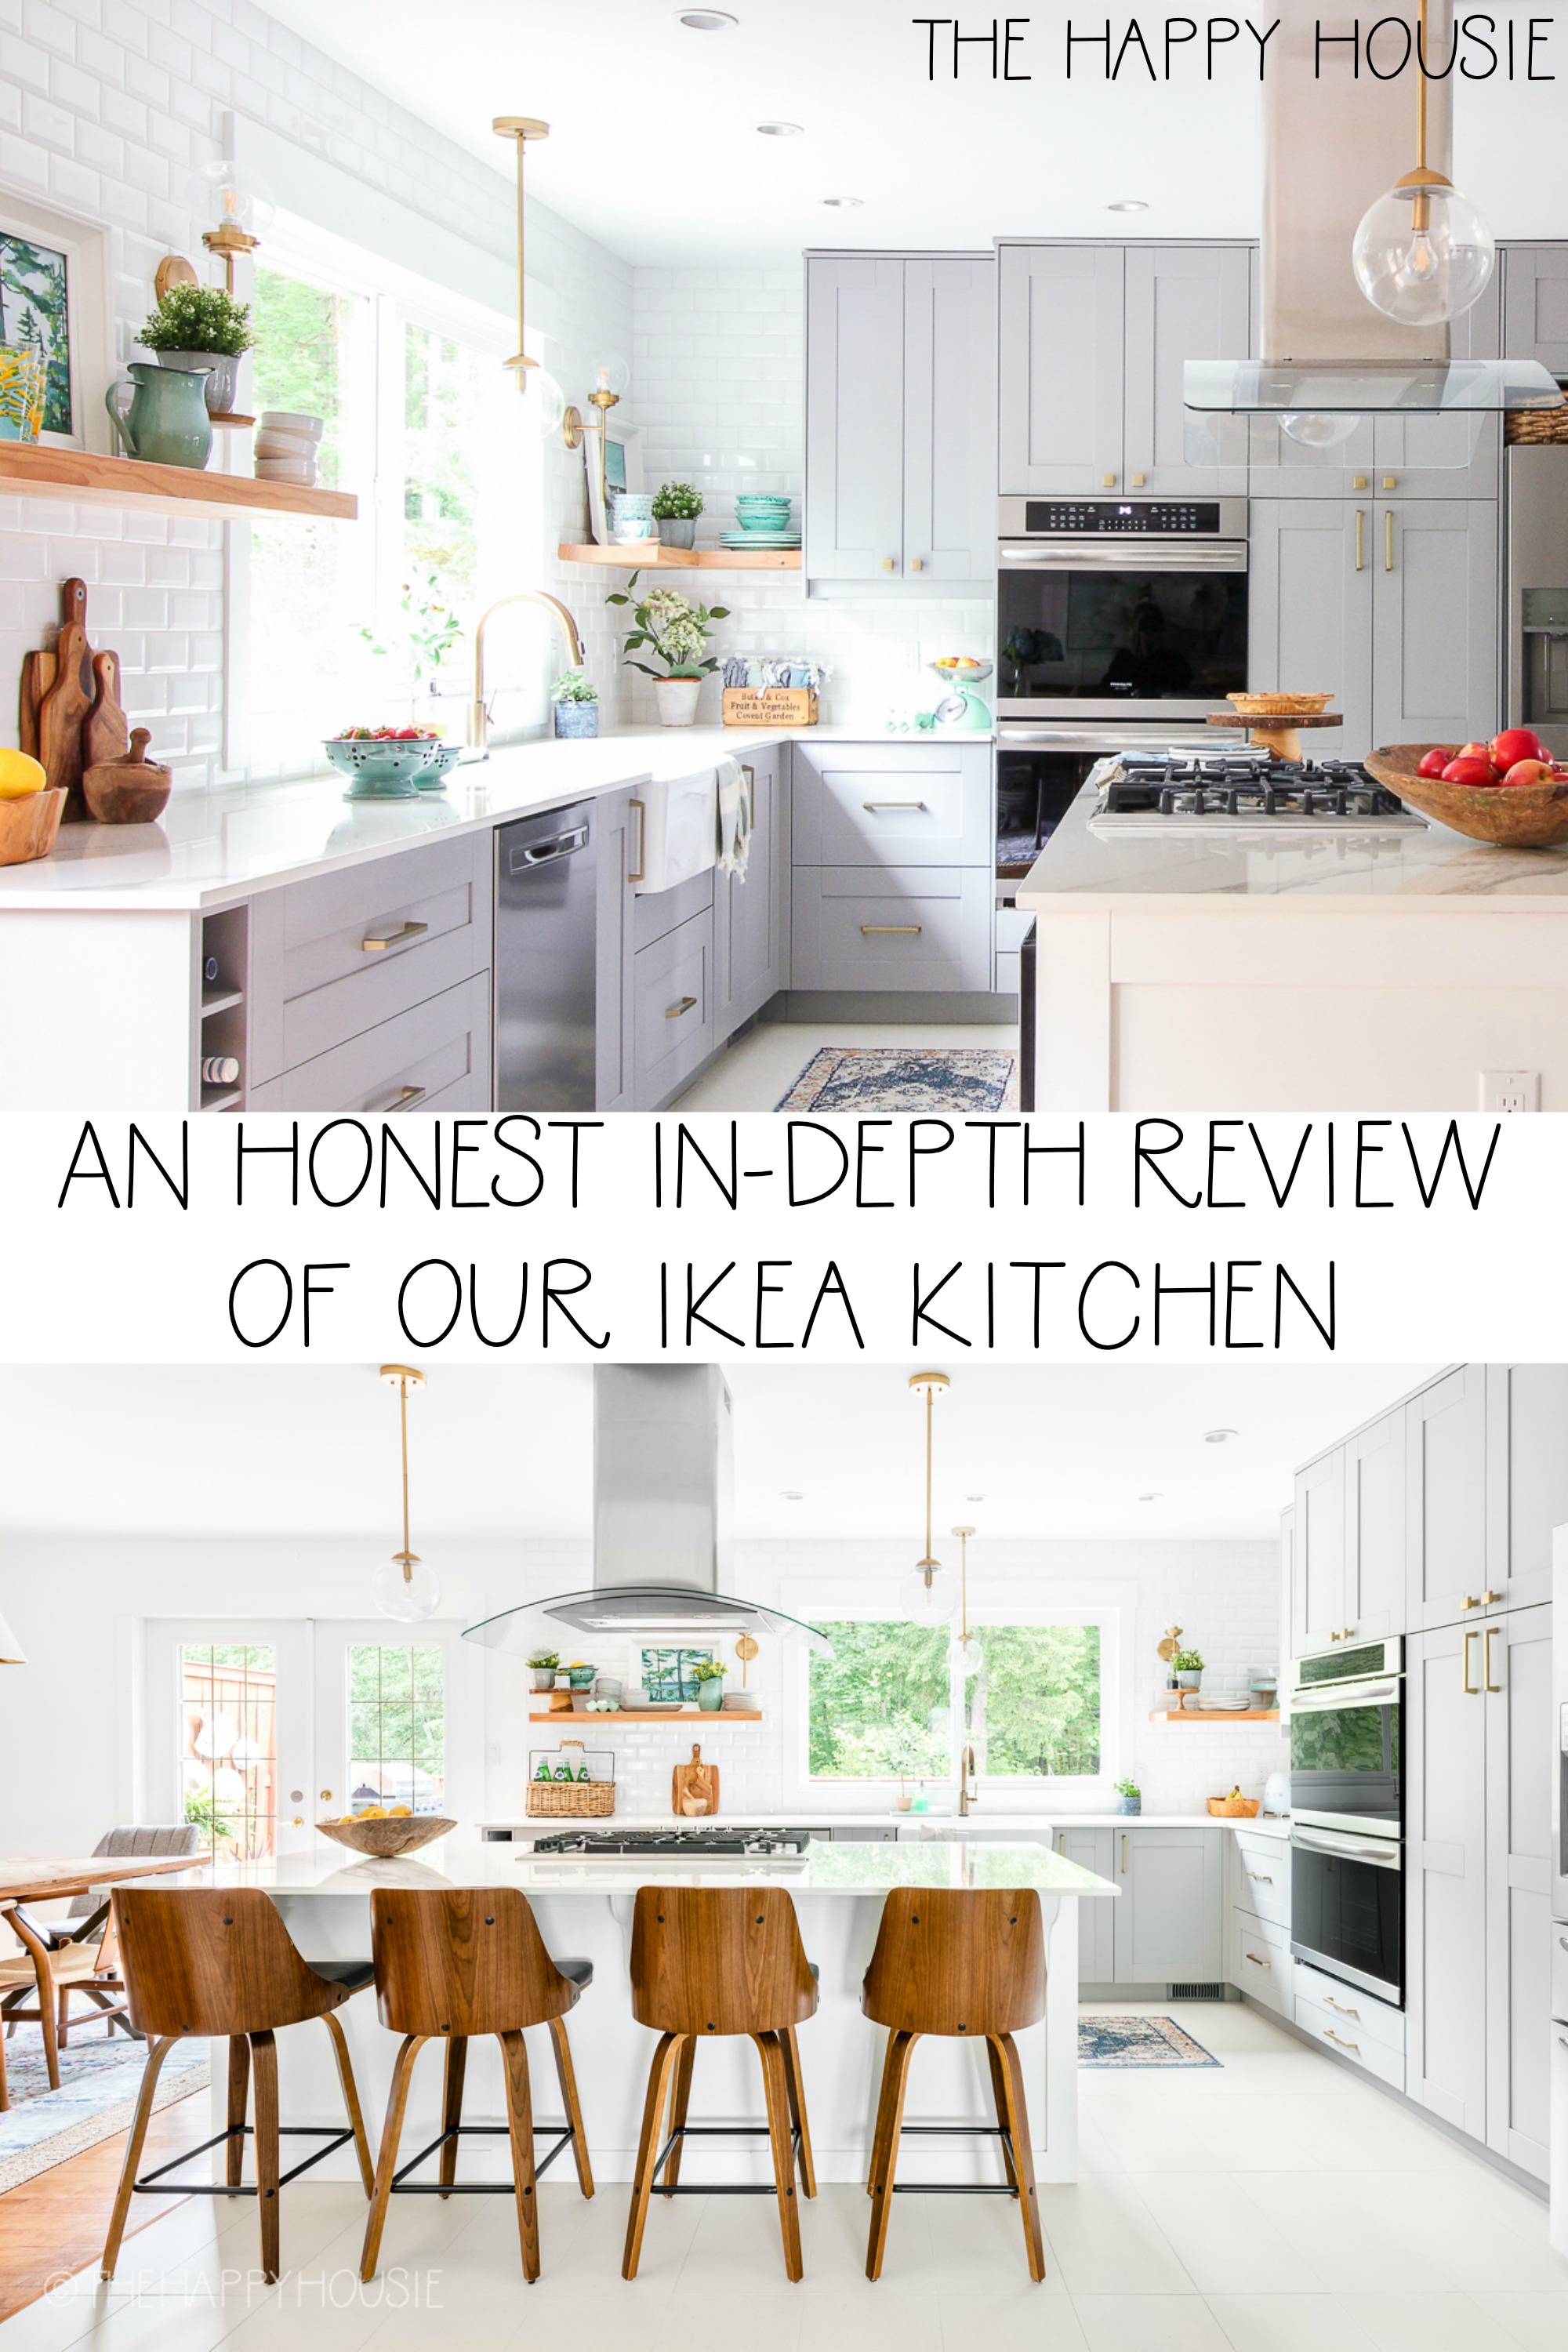 An Honest In Depth Review of Our Ikea Kitchen   The Happy Housie